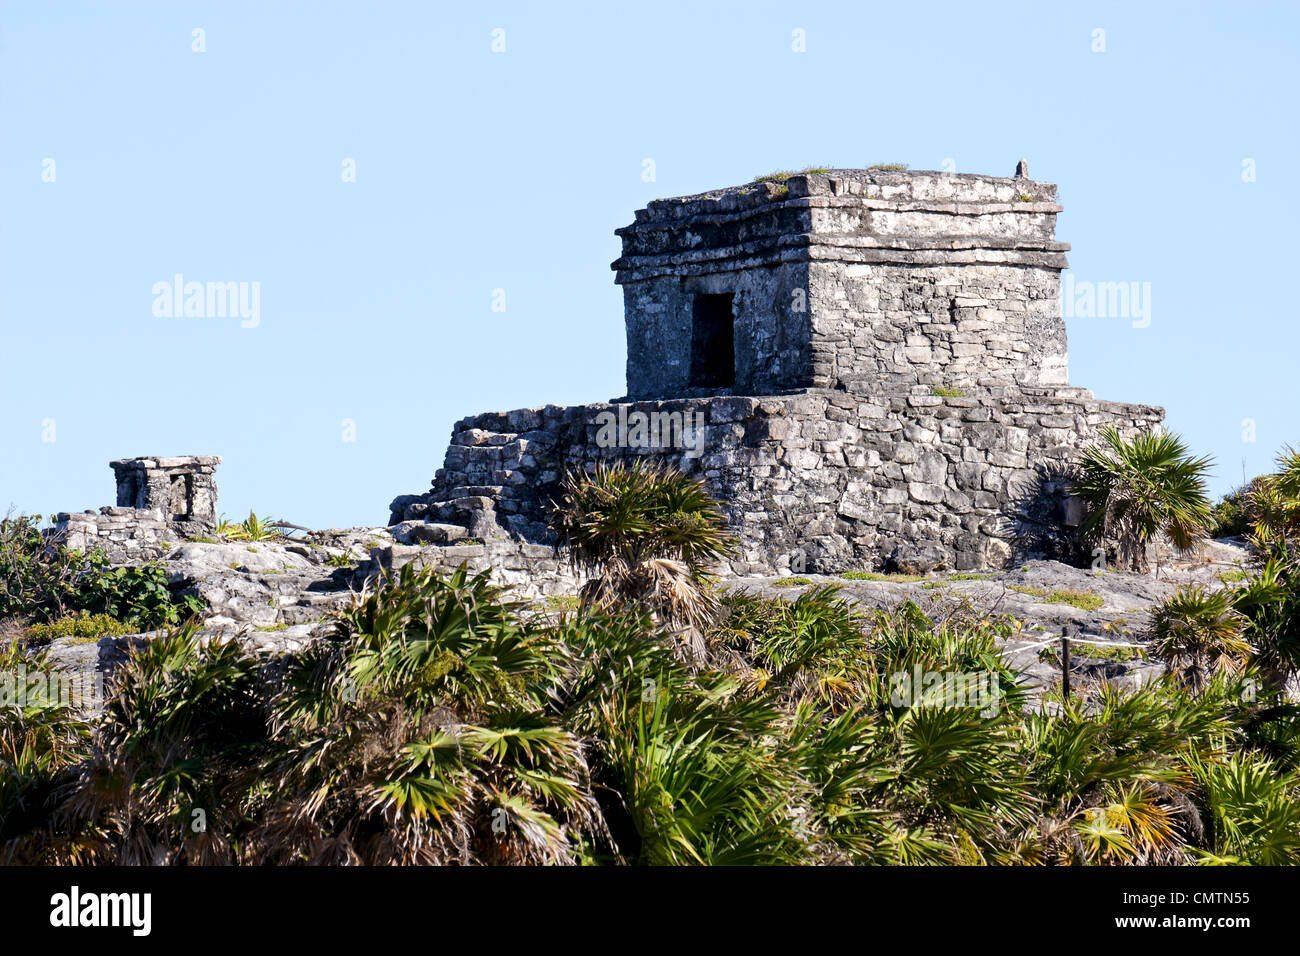 Mayan ruins in the sun before a clear blue sky at Tulum, Quintana Roo, Mexico. Stock Photo